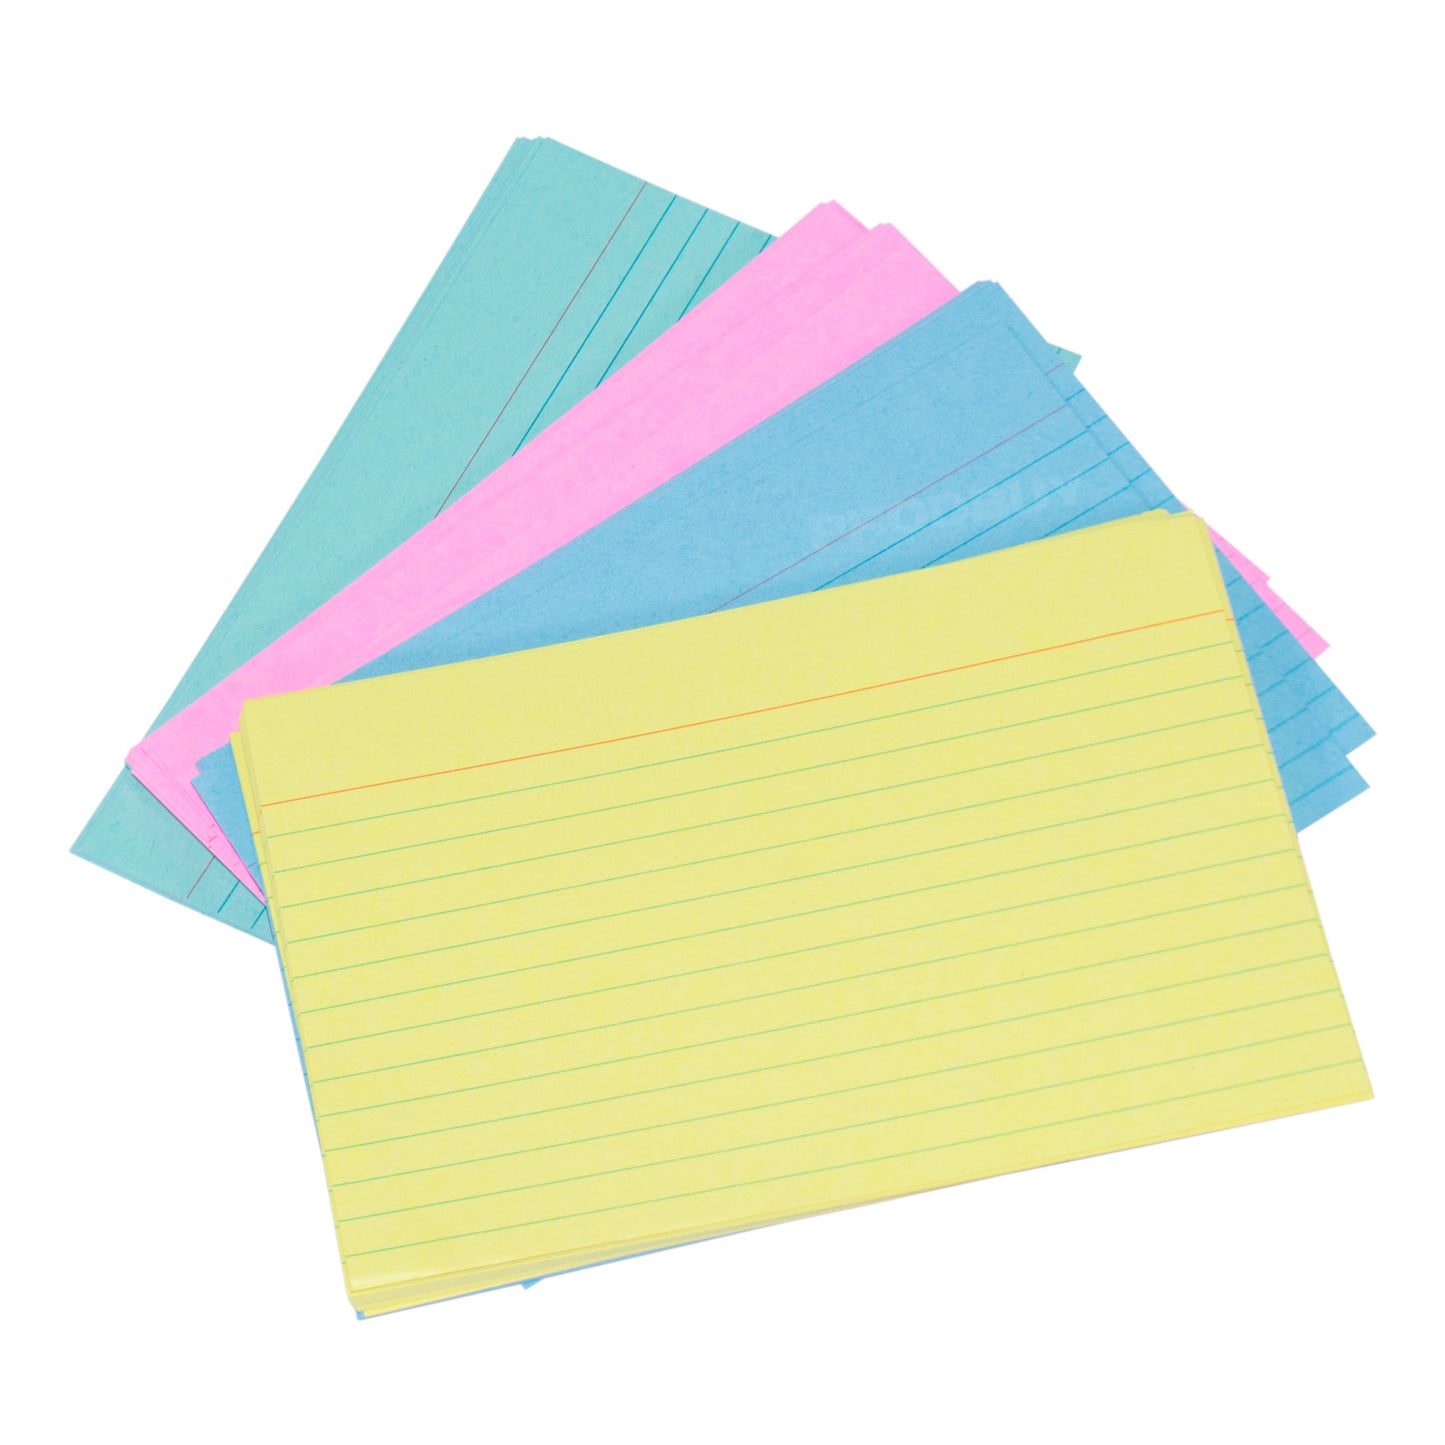 Pack of 1,000 Record Index Cards 6" x 4" Lined Colour Revision Sheets